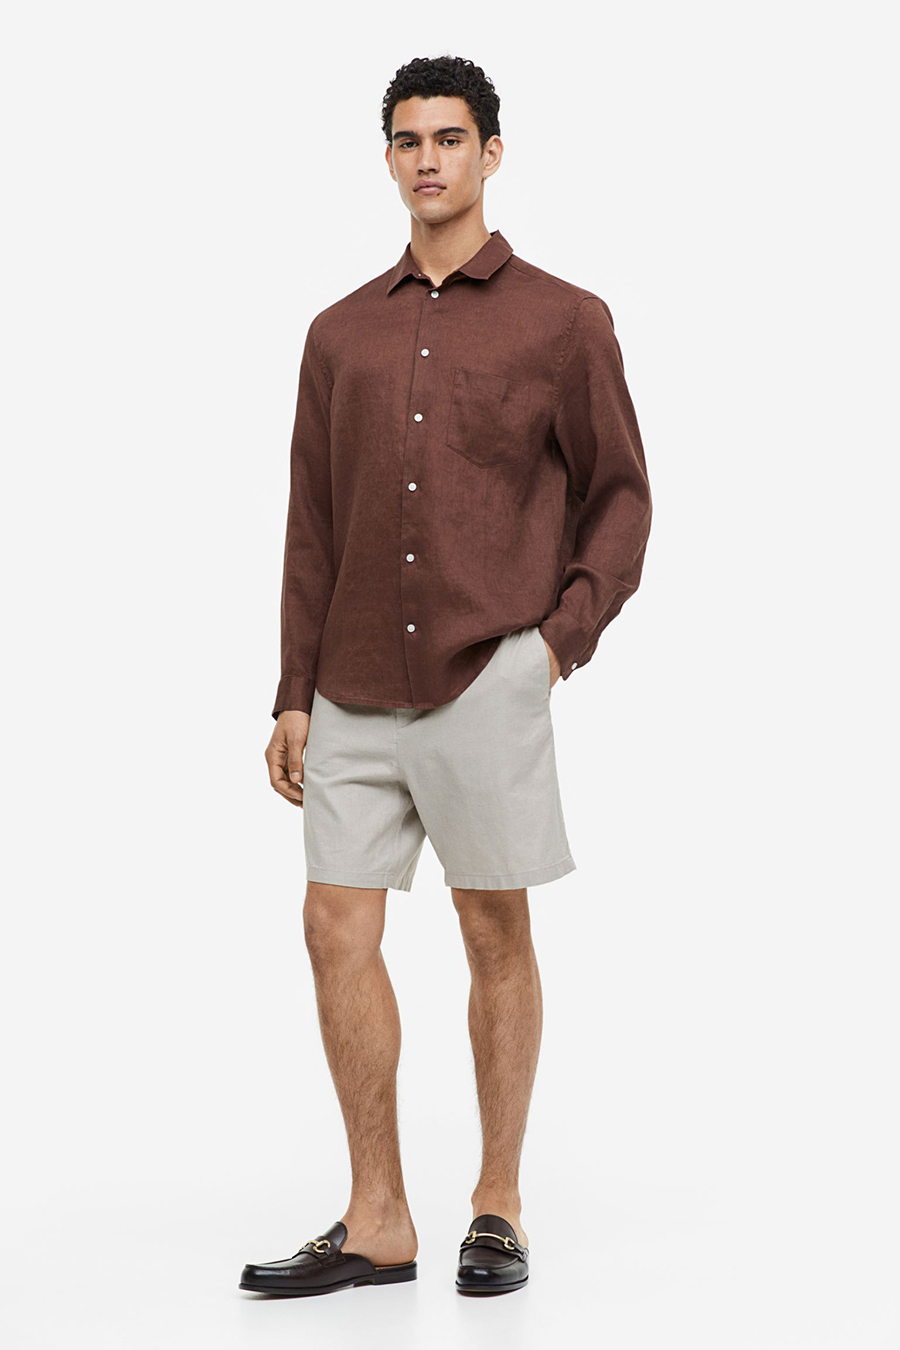 Brown linen long-sleeve shirt, gray shorts, and black loafers outfit